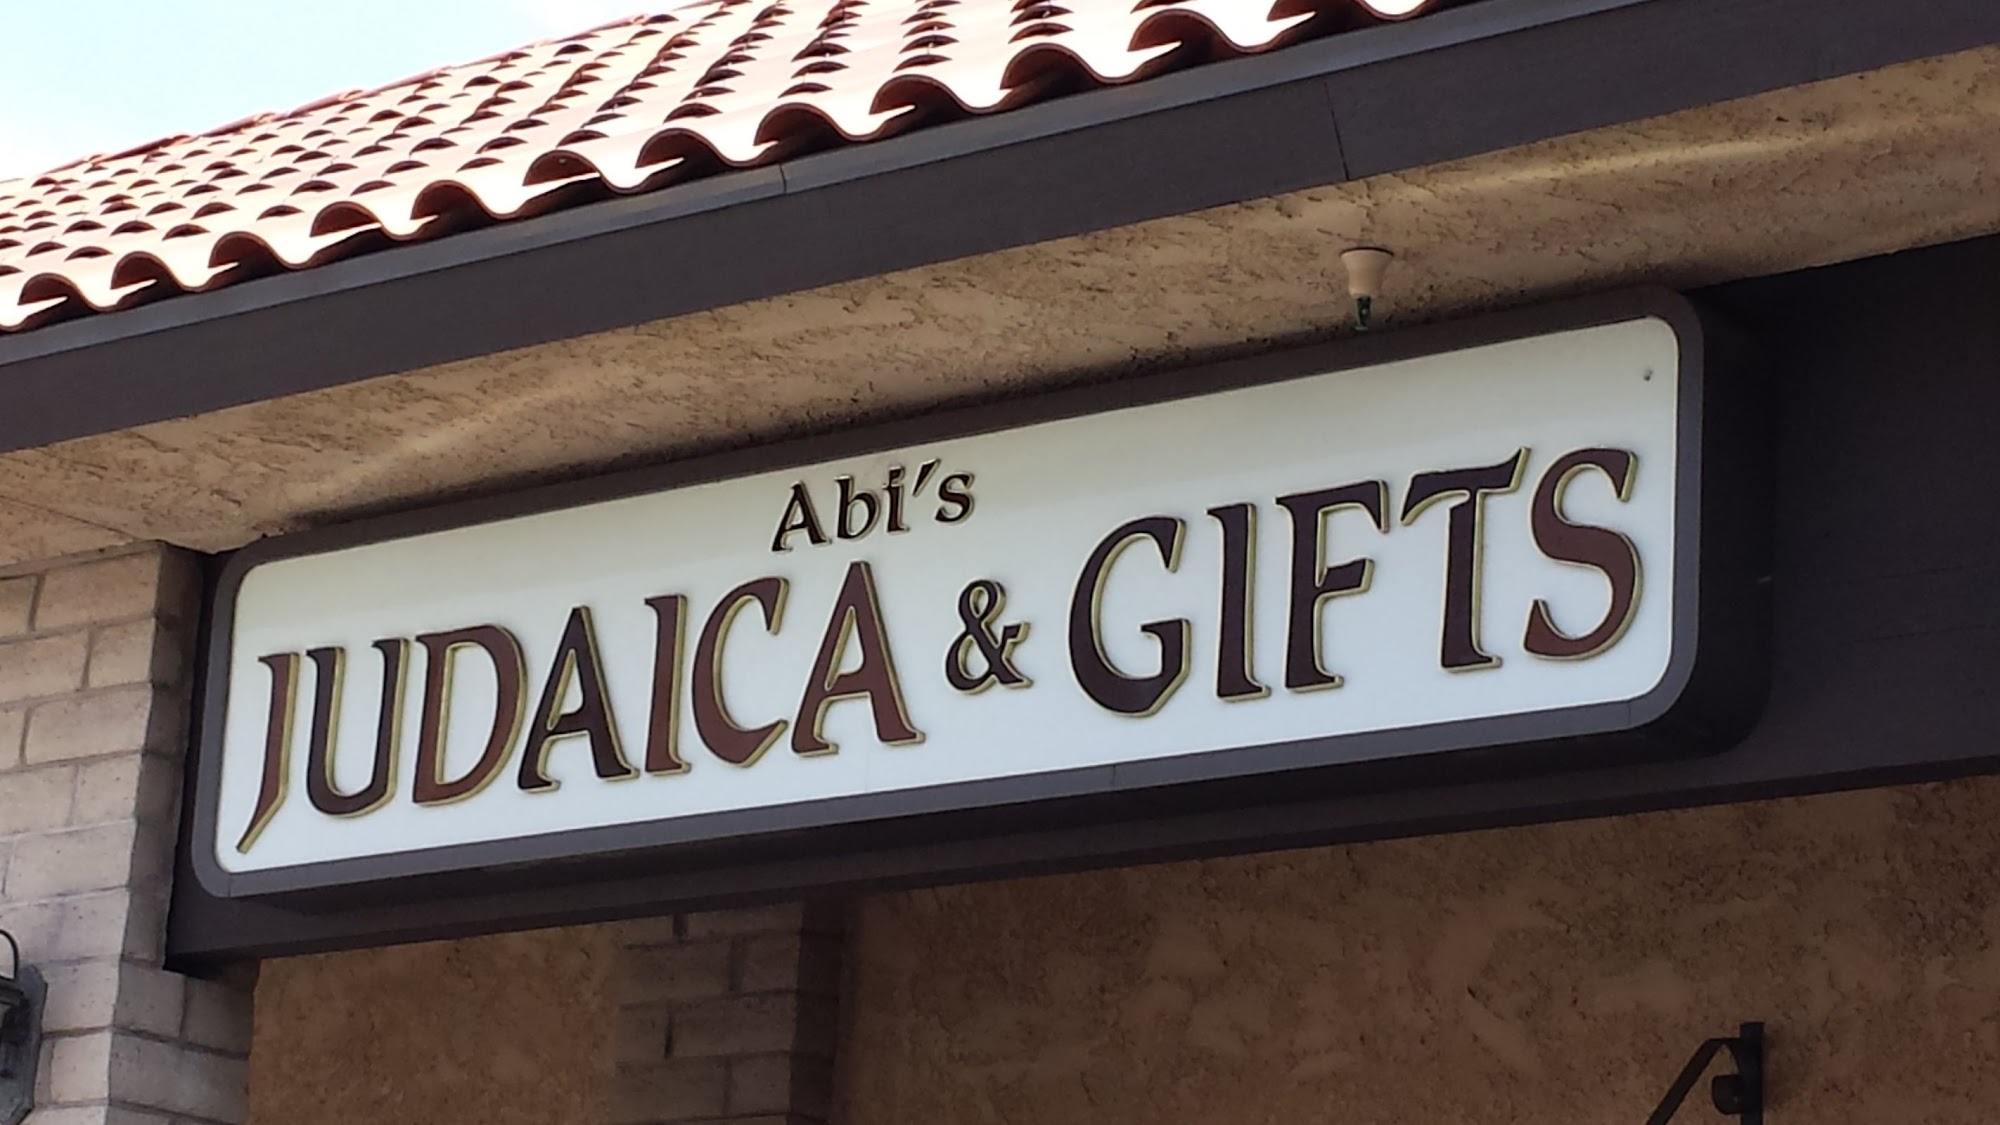 Abi's Judaica & Gifts